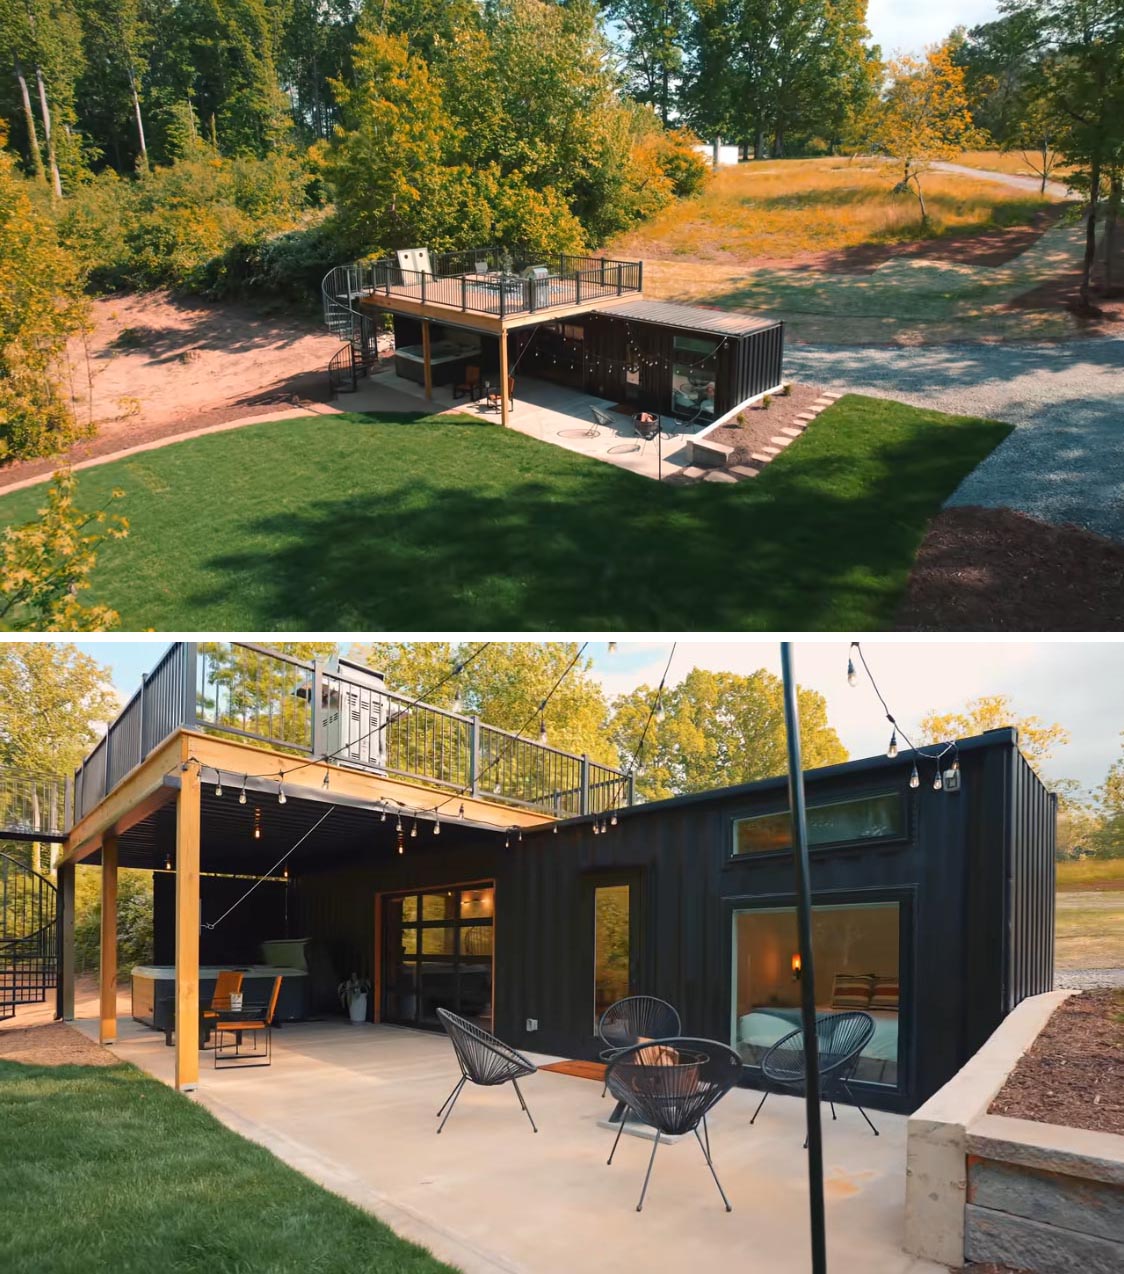 A shipping container tiny home with a black exterior, rooftop deck, outdoor entertaining space, and a modern interior.